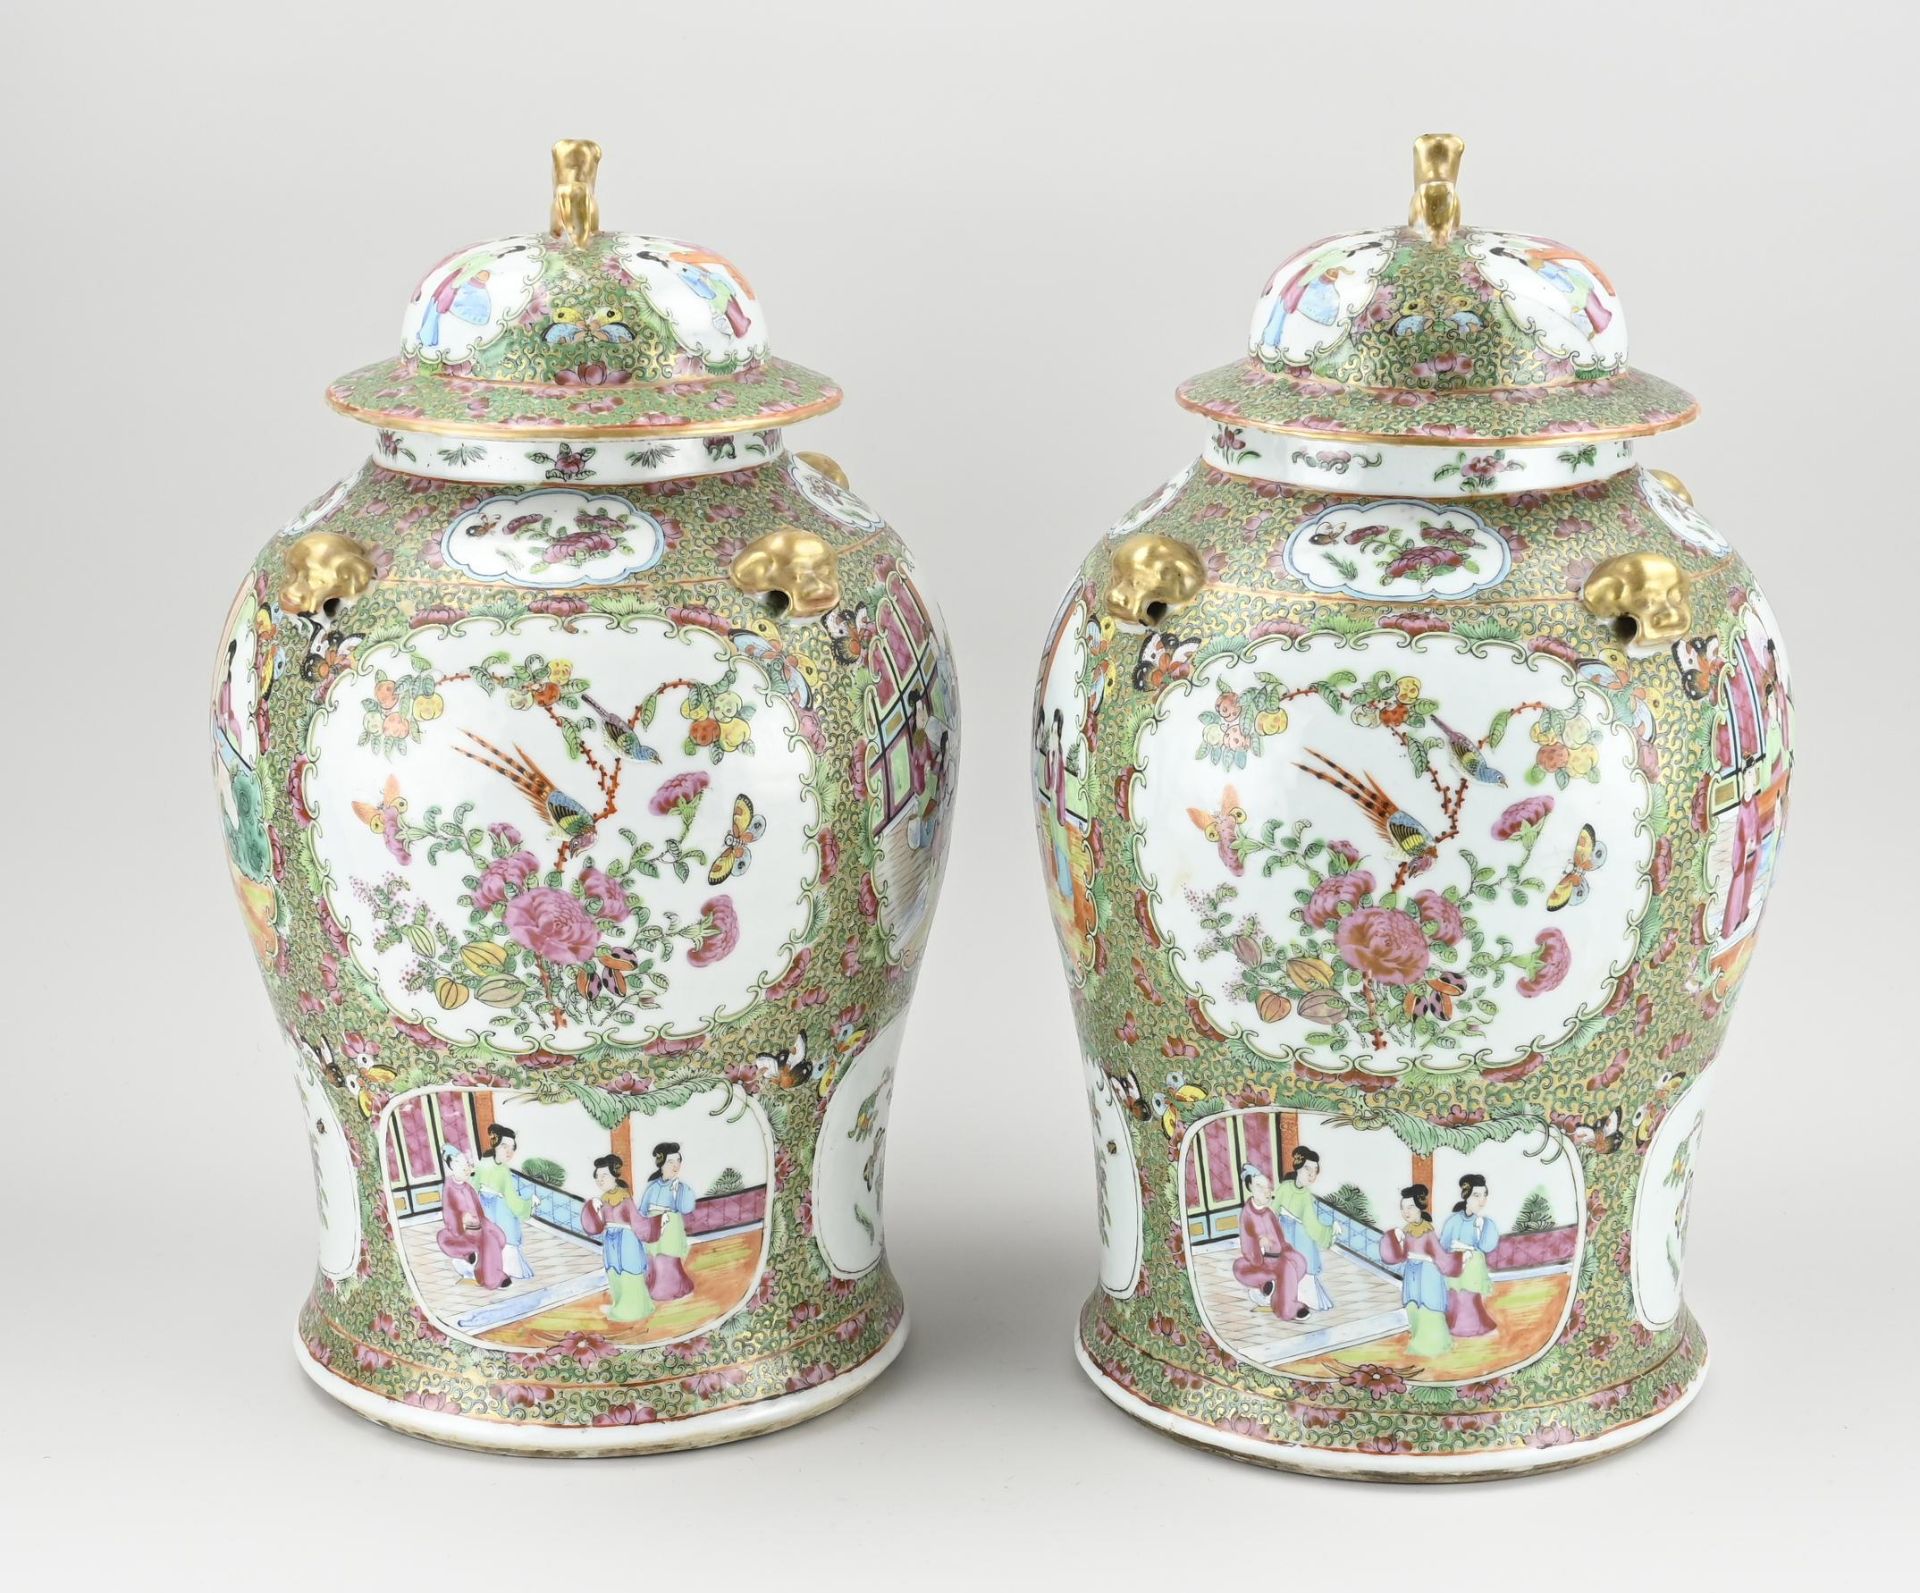 Two Chinese Cantonese lidded vases, H 44.5 x Ø 26 cm. - Image 4 of 5